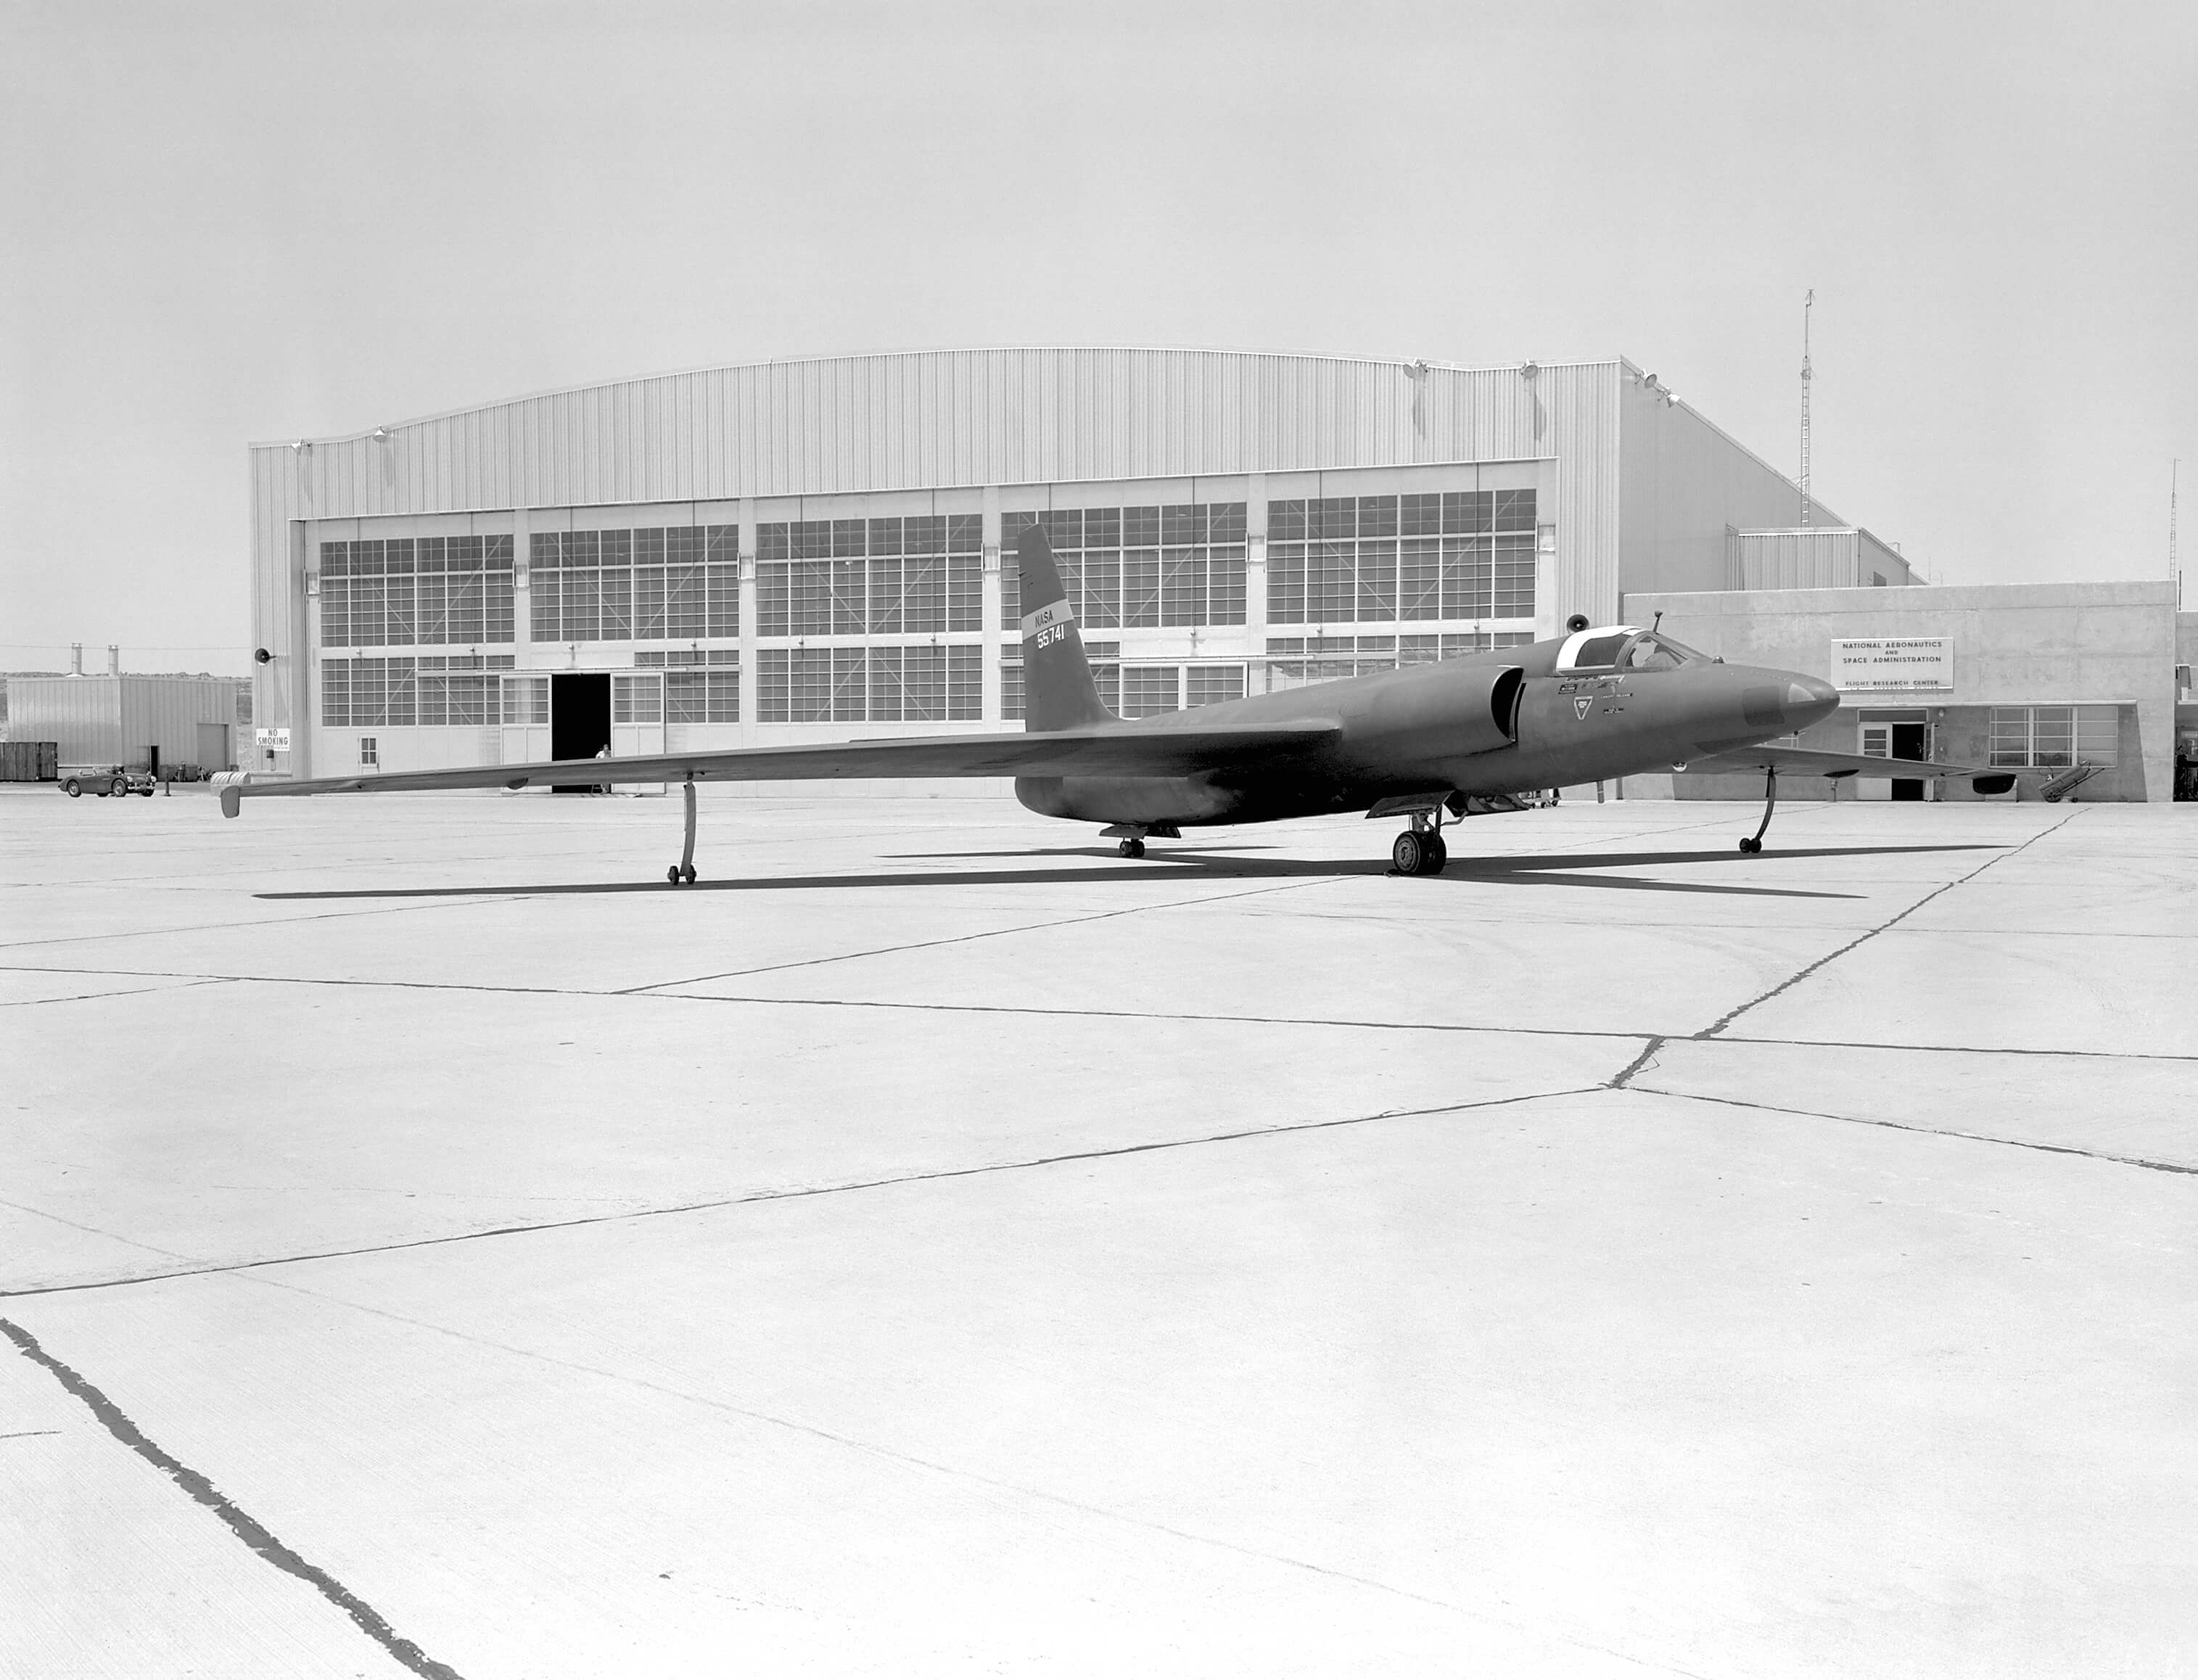 A U-2 plane with fictitious NASA markings in May 1960.